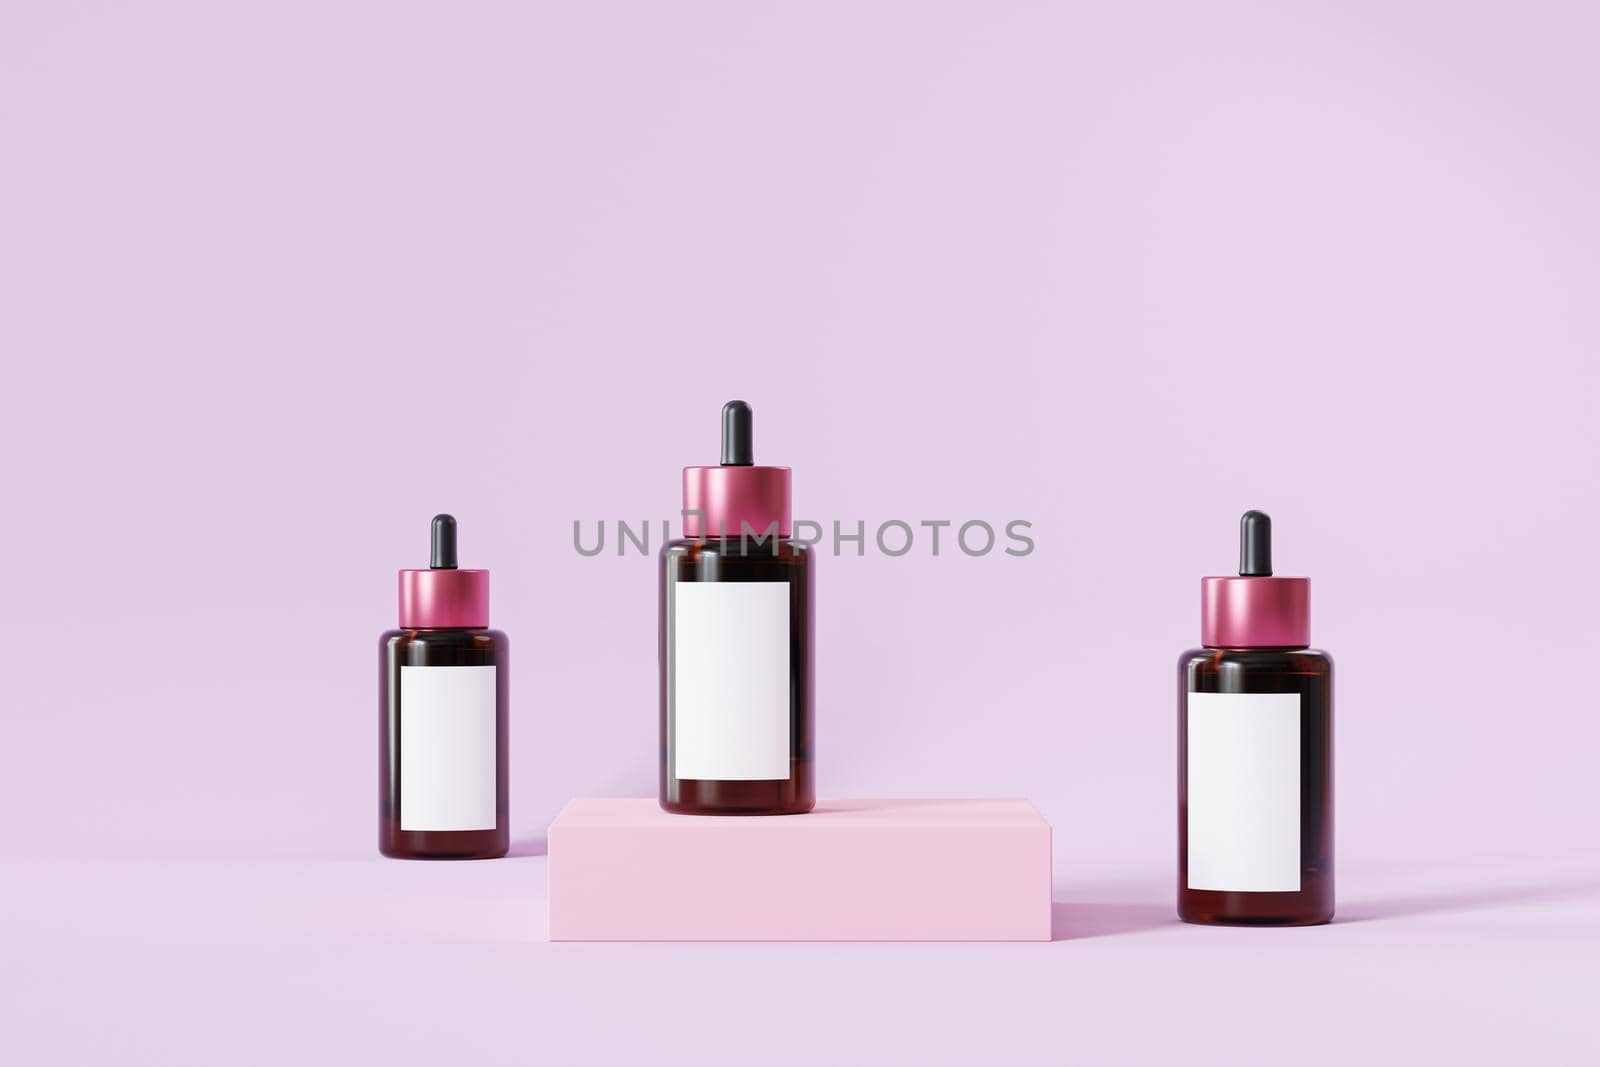 Mockup bottles with label for cosmetics products, template or advertising, pink background, 3d illustration render by Frostroomhead